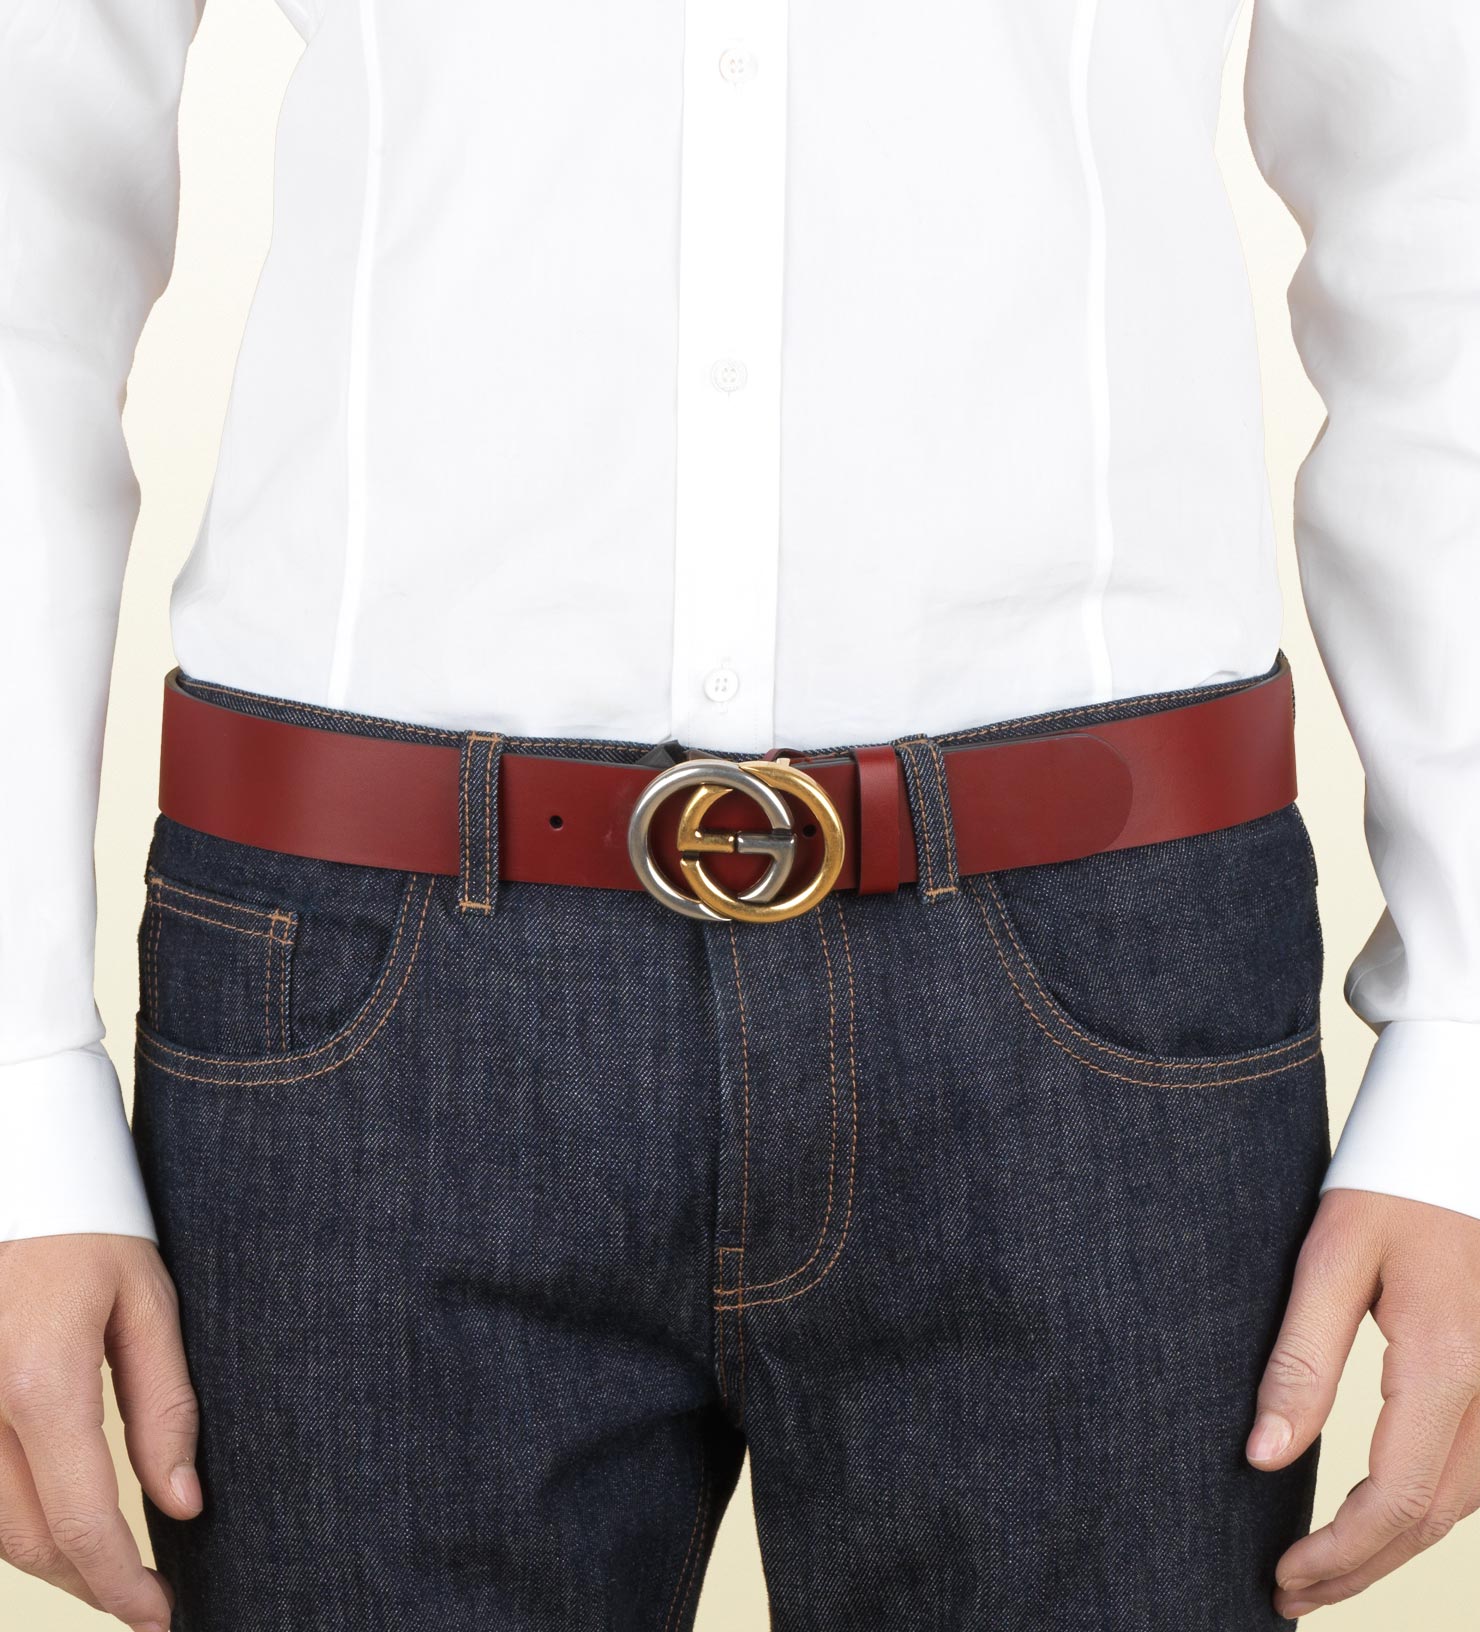 Lyst - Gucci Belt with Bicolor Interlocking G Buckle in Red for Men